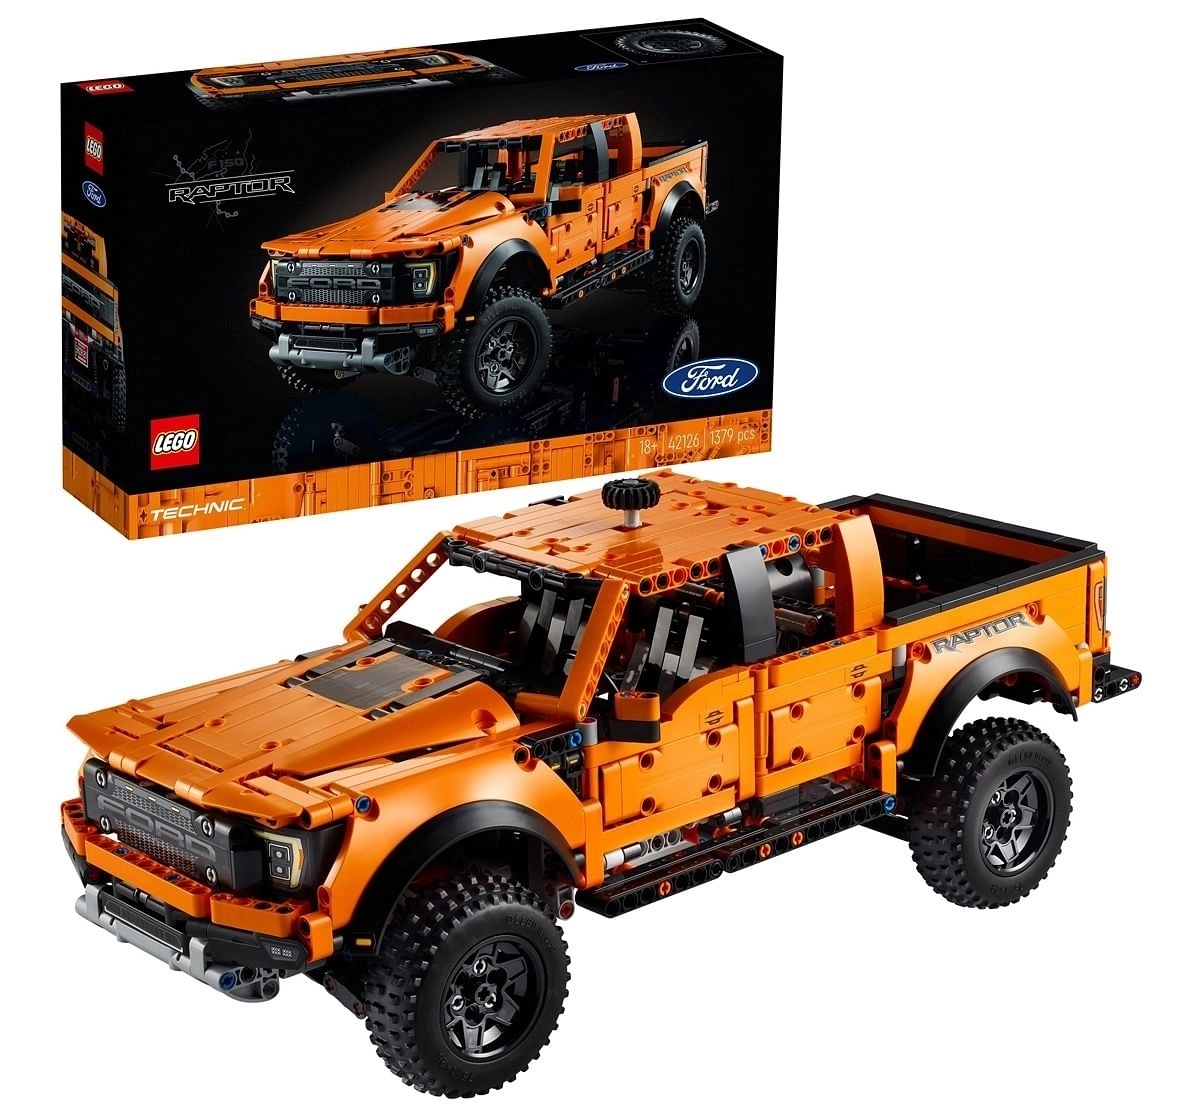 LEGO Technic Ford F-150 Raptor 42126 Model Building Kit (1,379 Pieces)